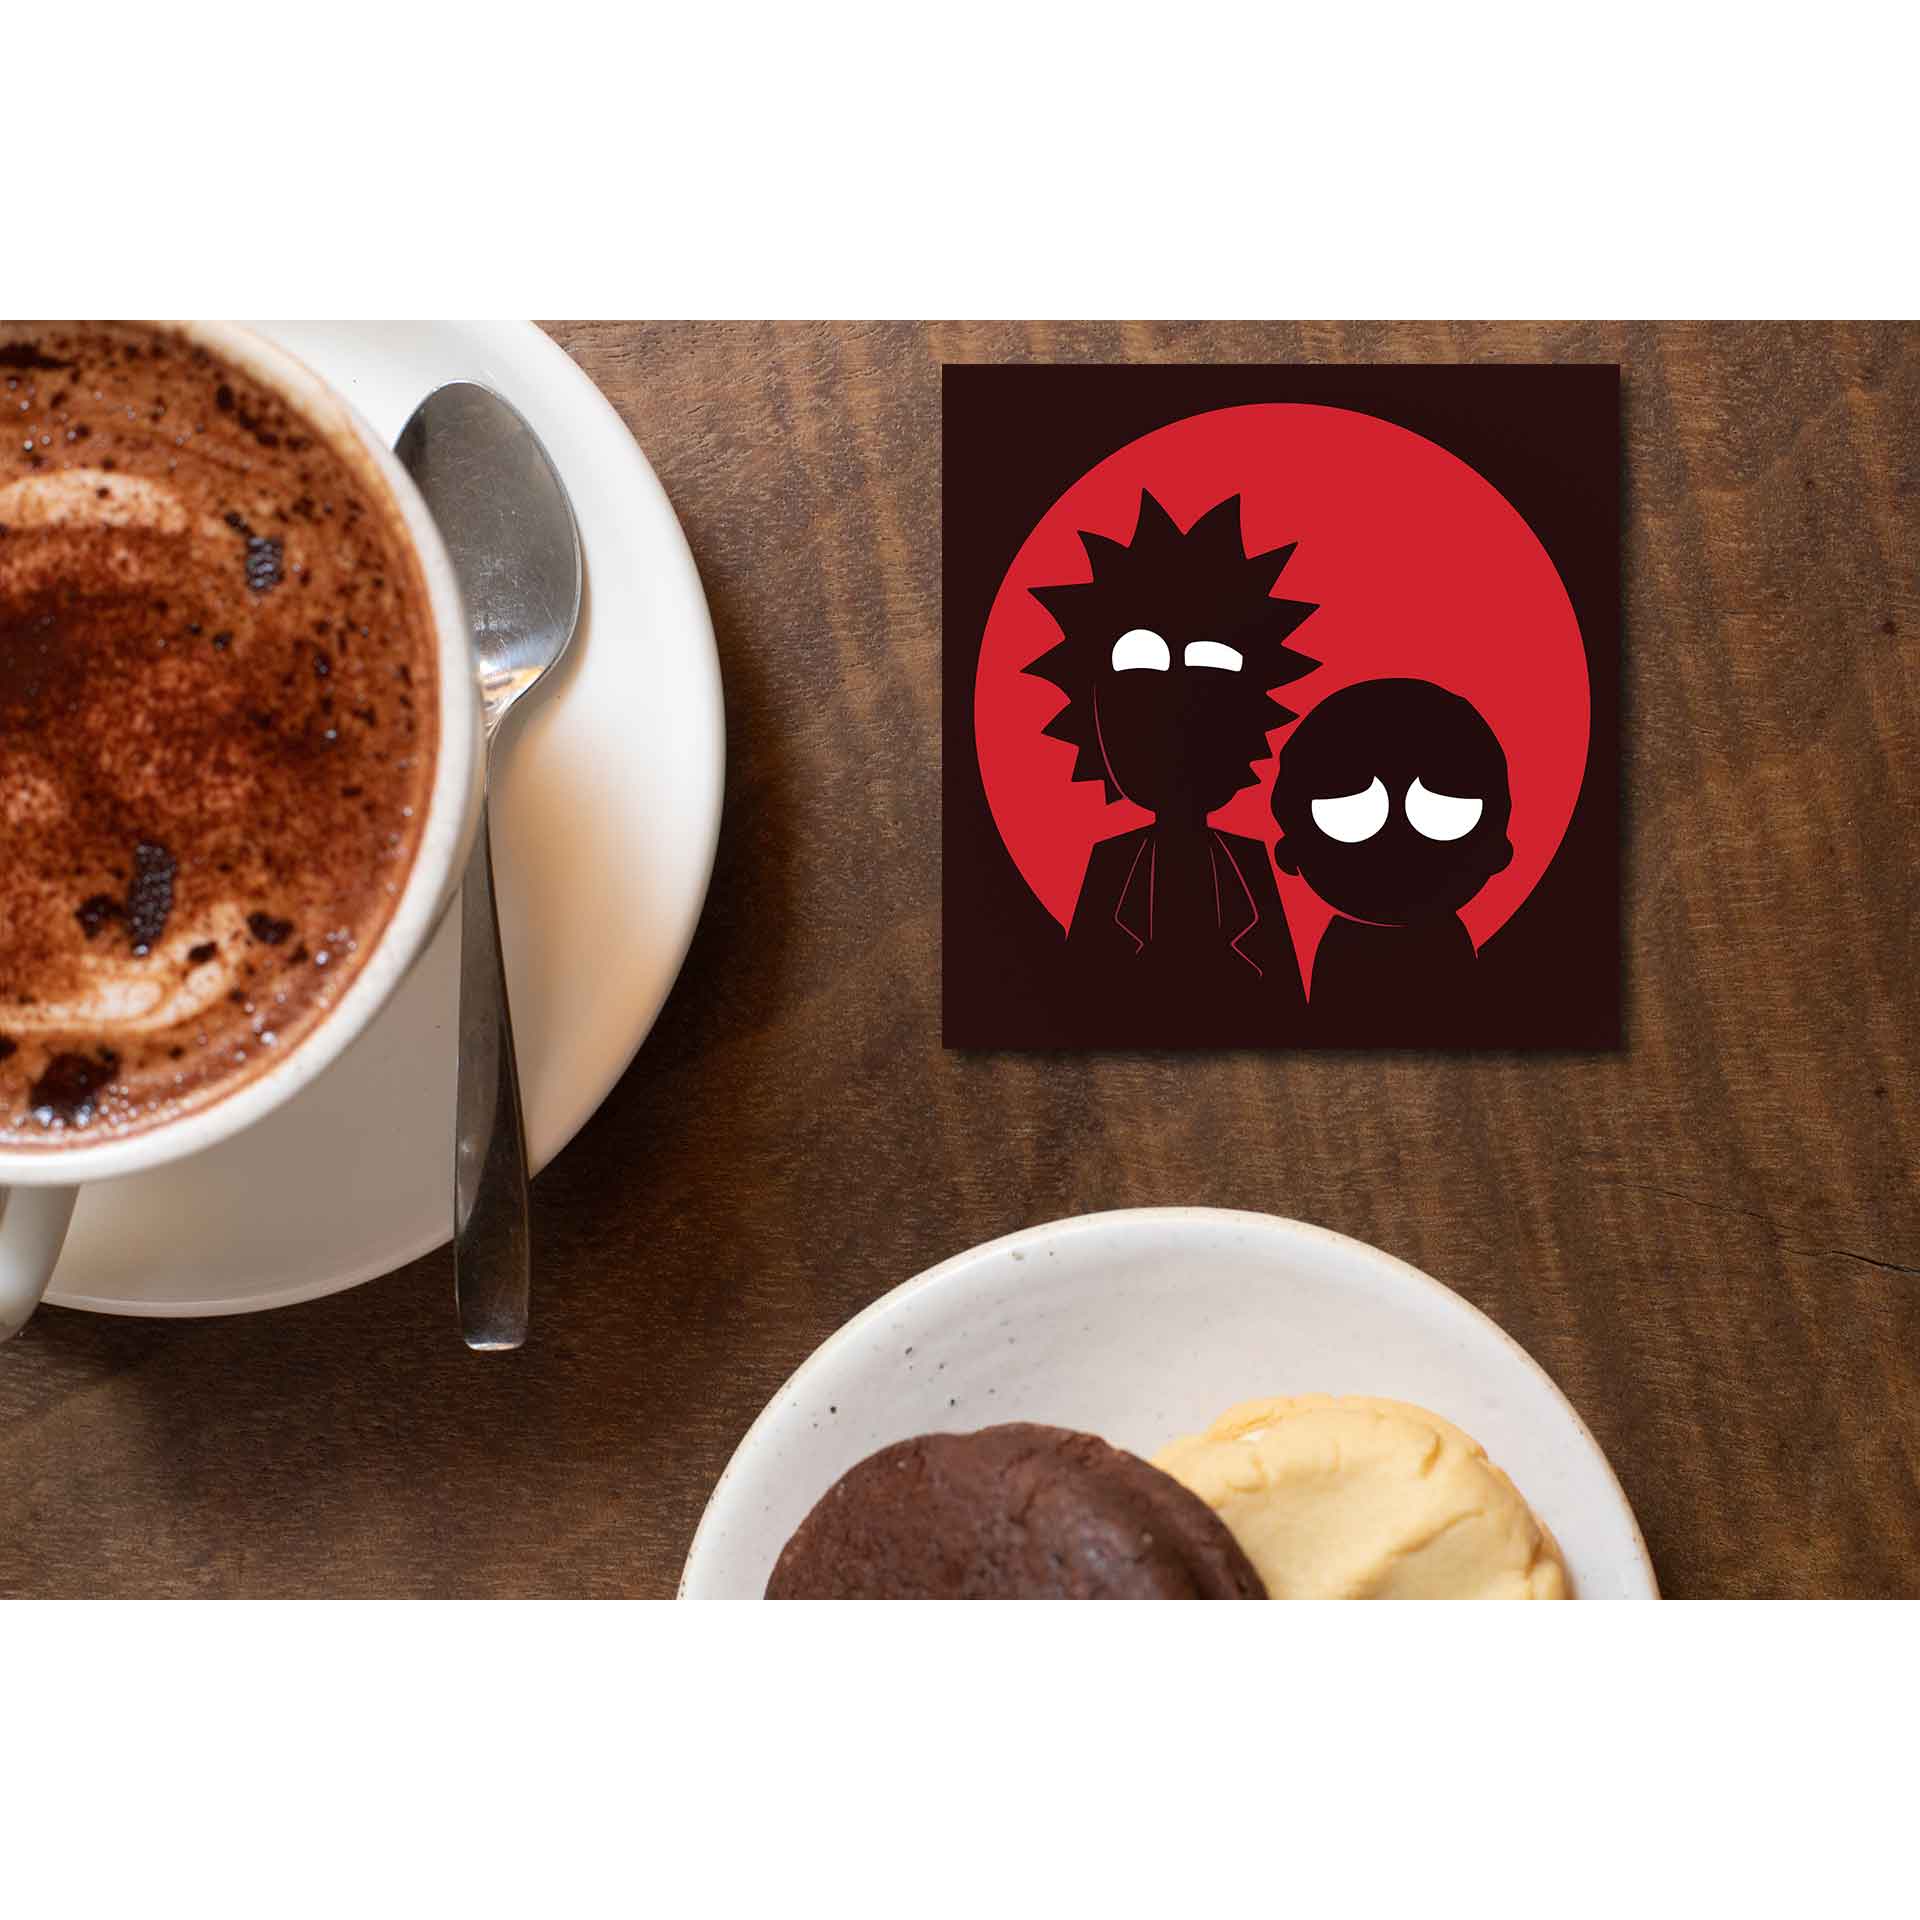 rick and morty silhouette coasters wooden table cups indian buy online india the banyan tee tbt men women girls boys unisex  rick and morty online summer beth mr meeseeks jerry quote vector art clothing accessories merchandise